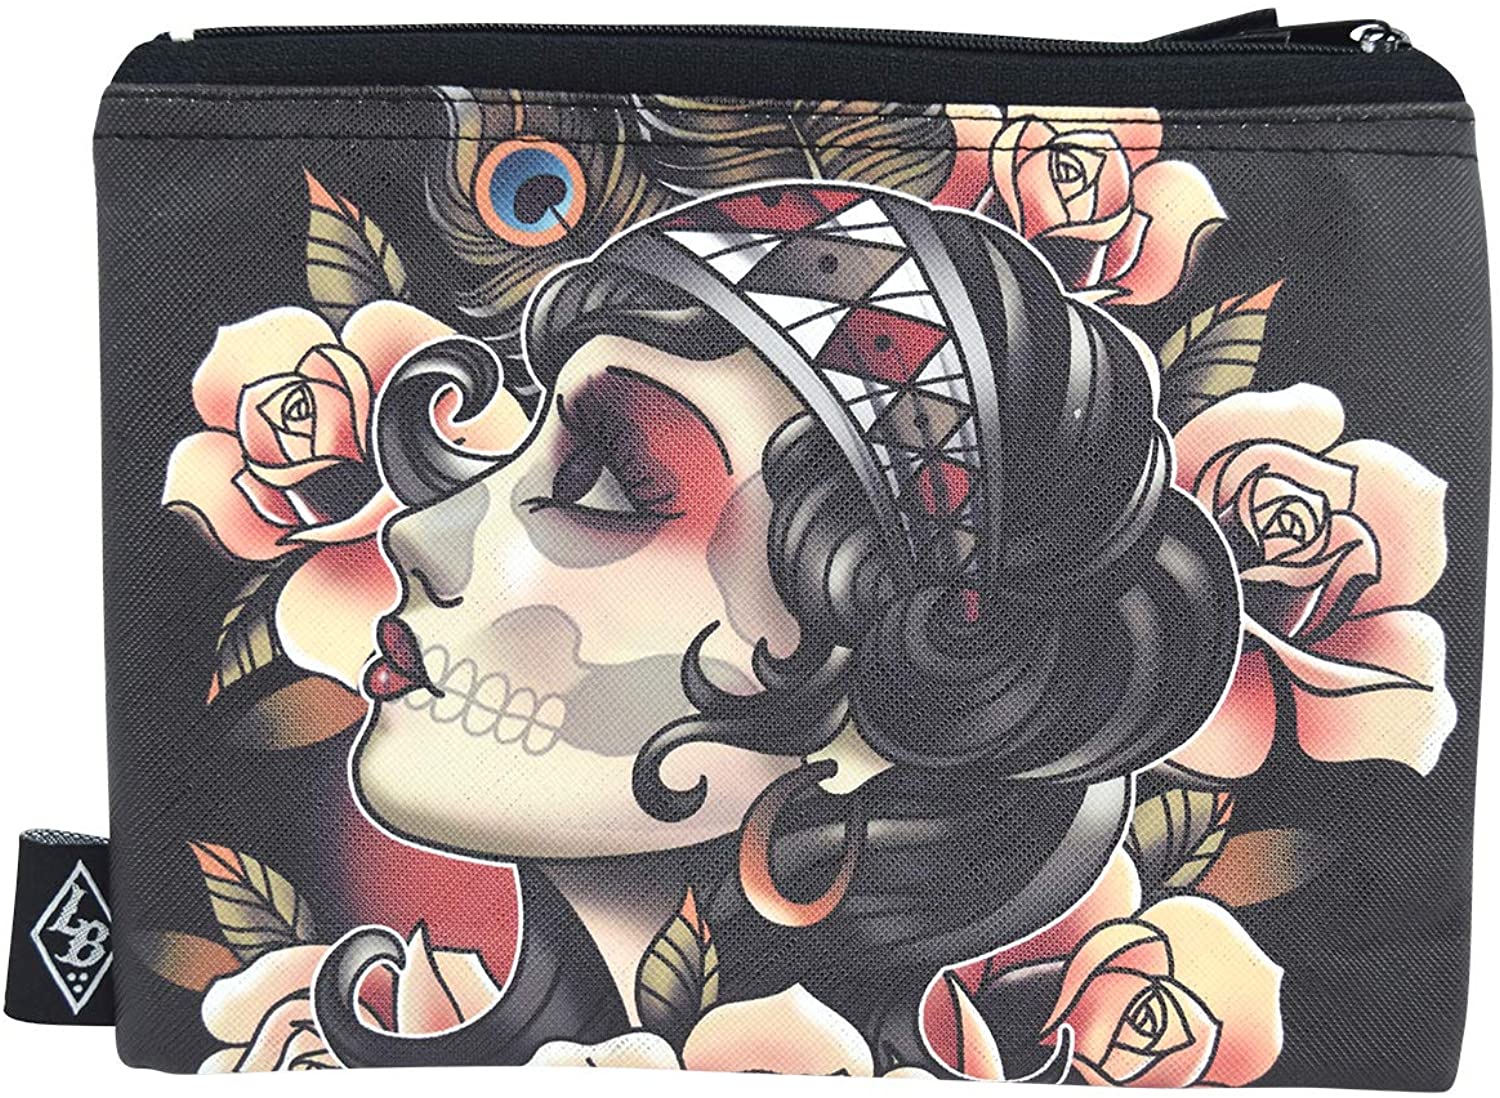 Liquorbrand Gypsy Rose Sugar Skull Tattoo Art wristlet pouch bag and Coin Purse